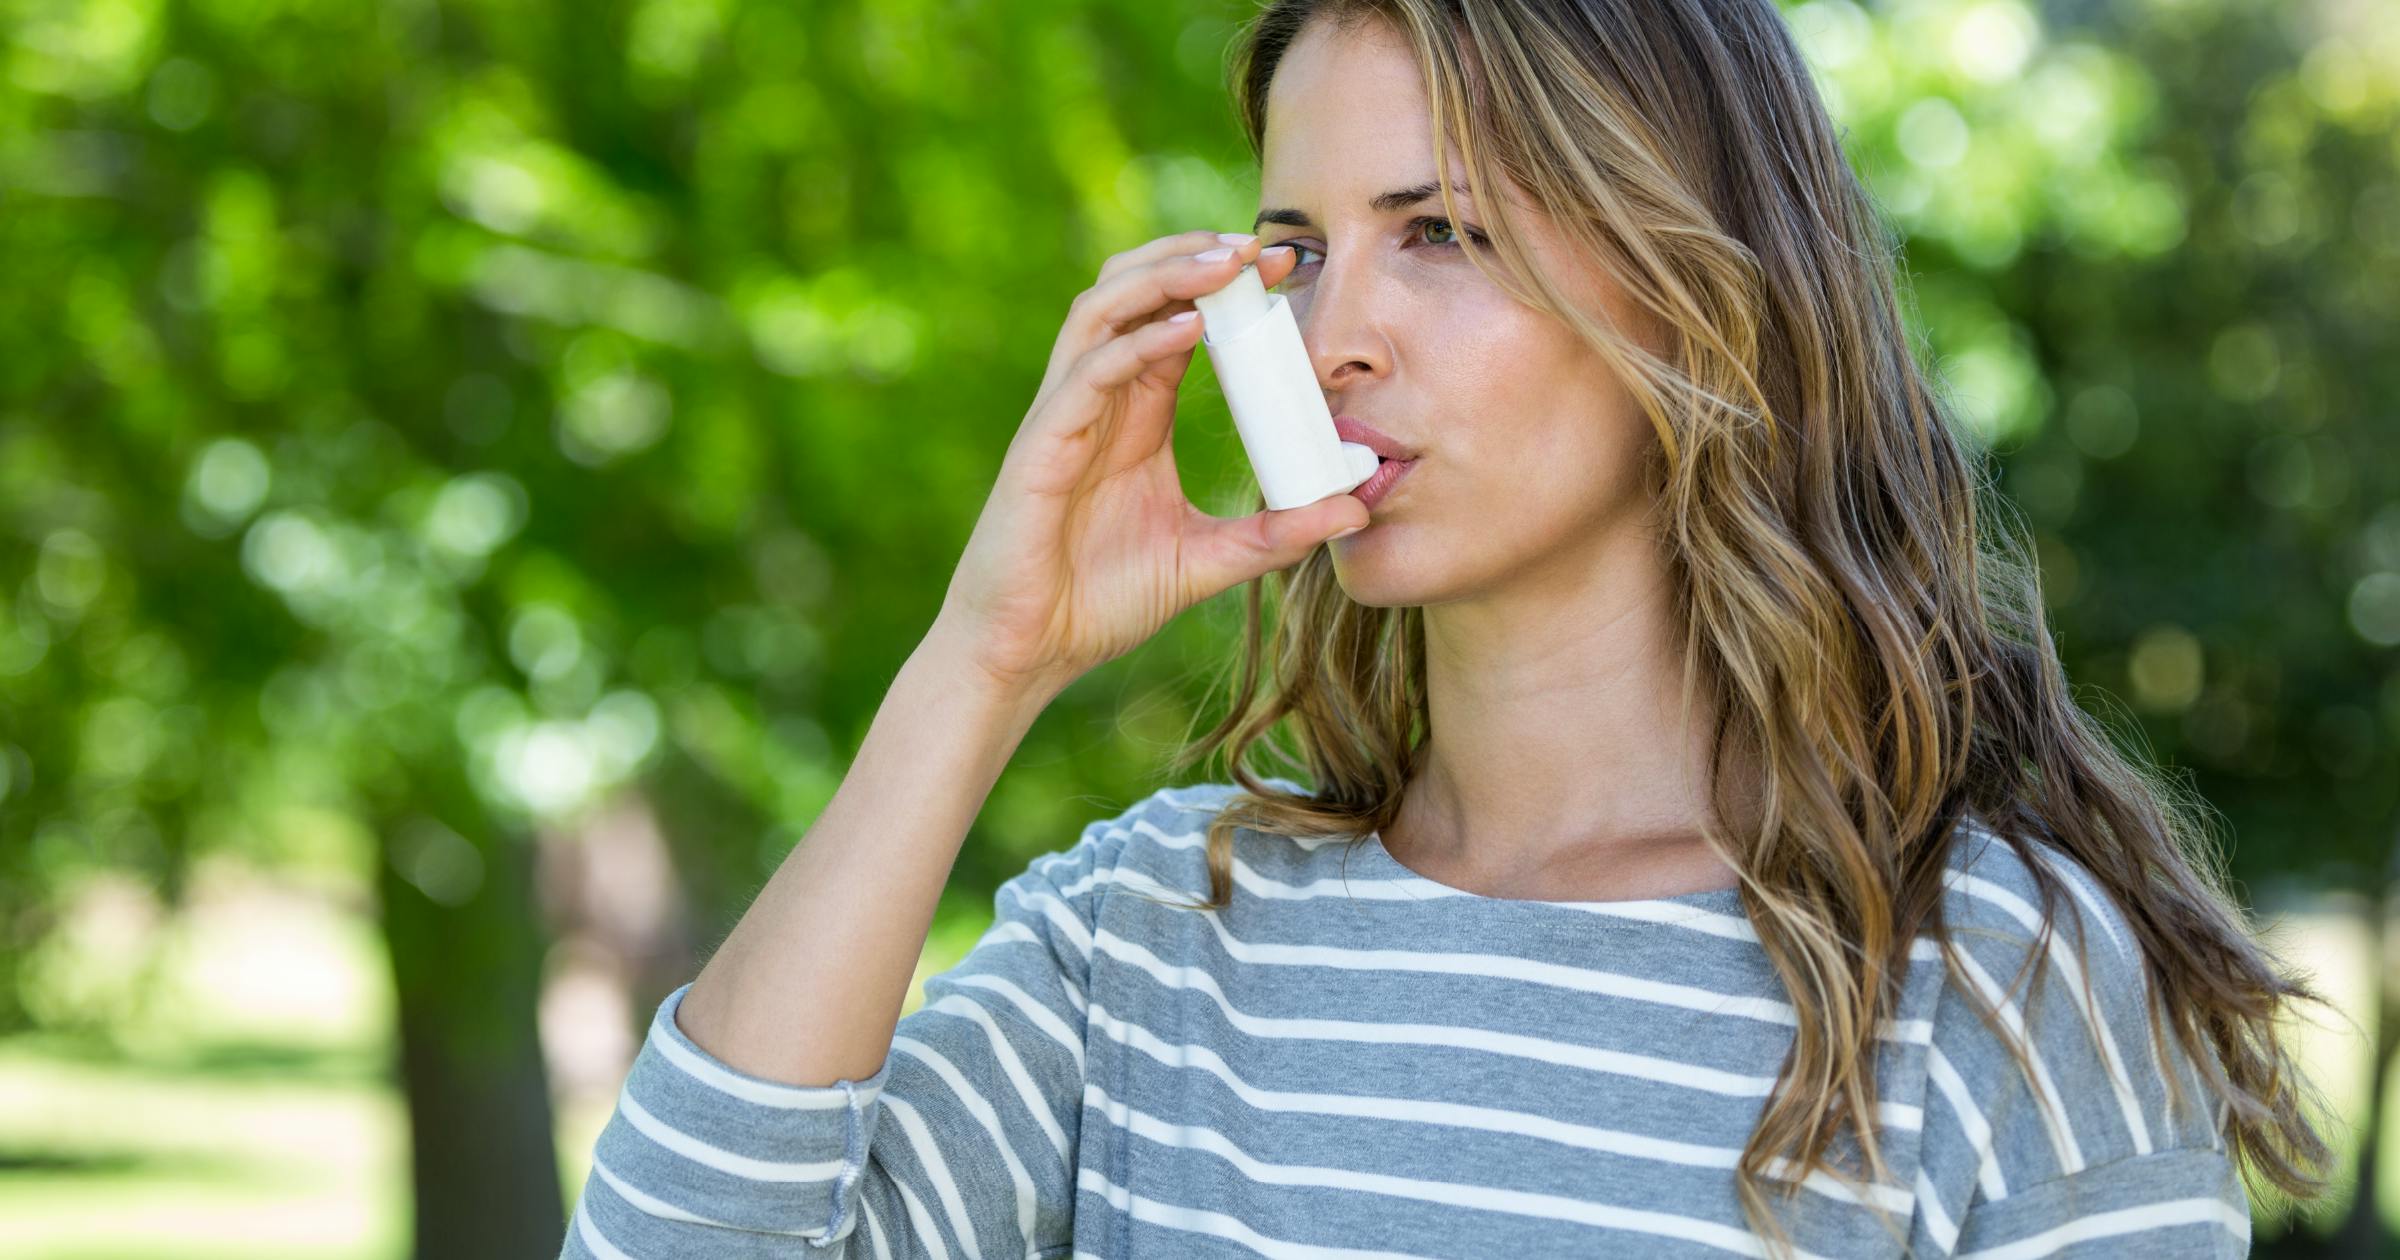 Tips for asthma patients